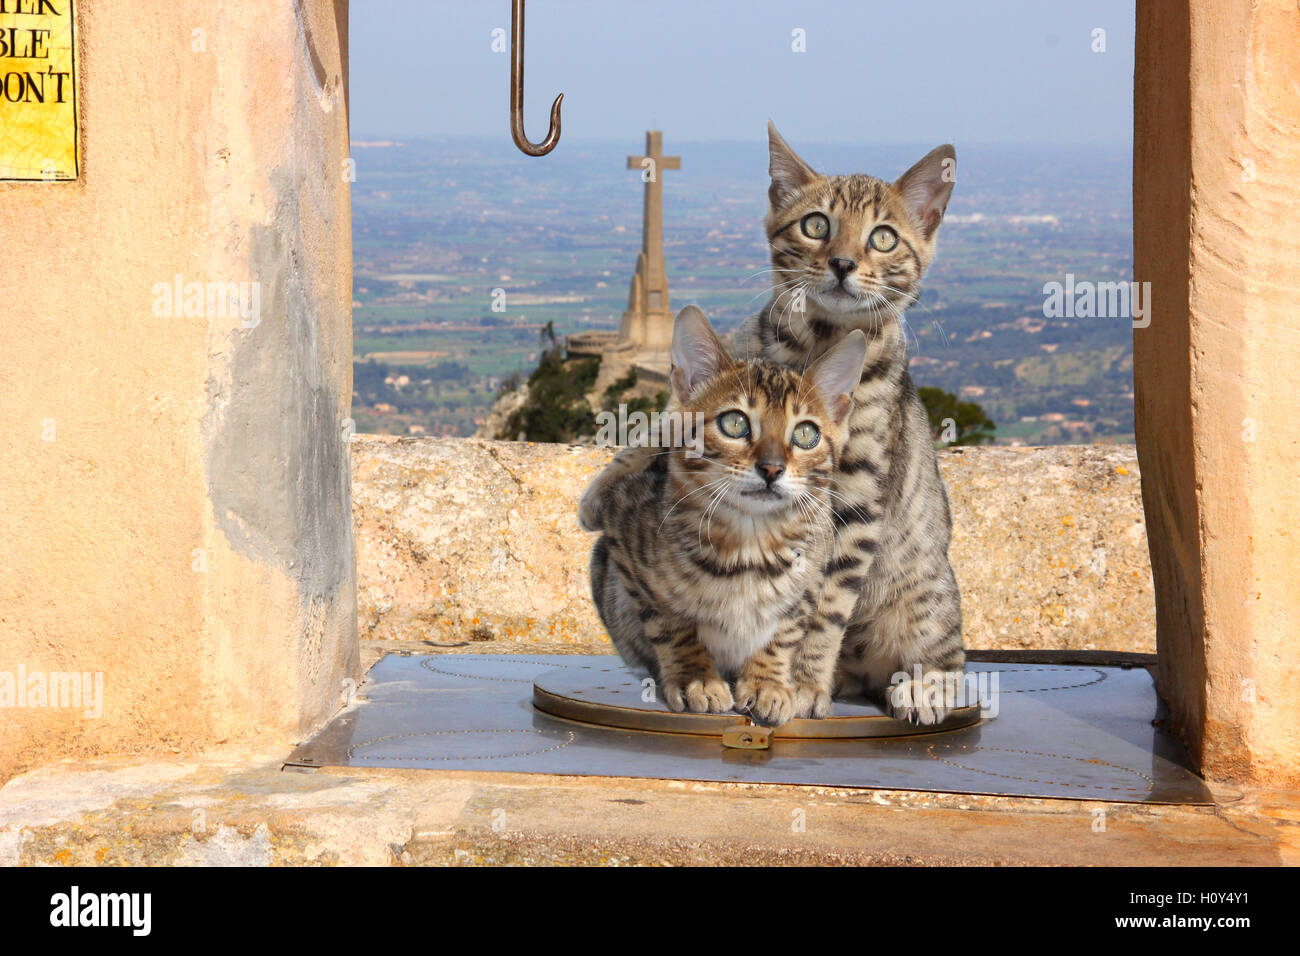 2 (two) bengal kittens sitting on a covered fountain at a monastery, on a mountain, Spain, Mallorca, Sant Salvador Stock Photo